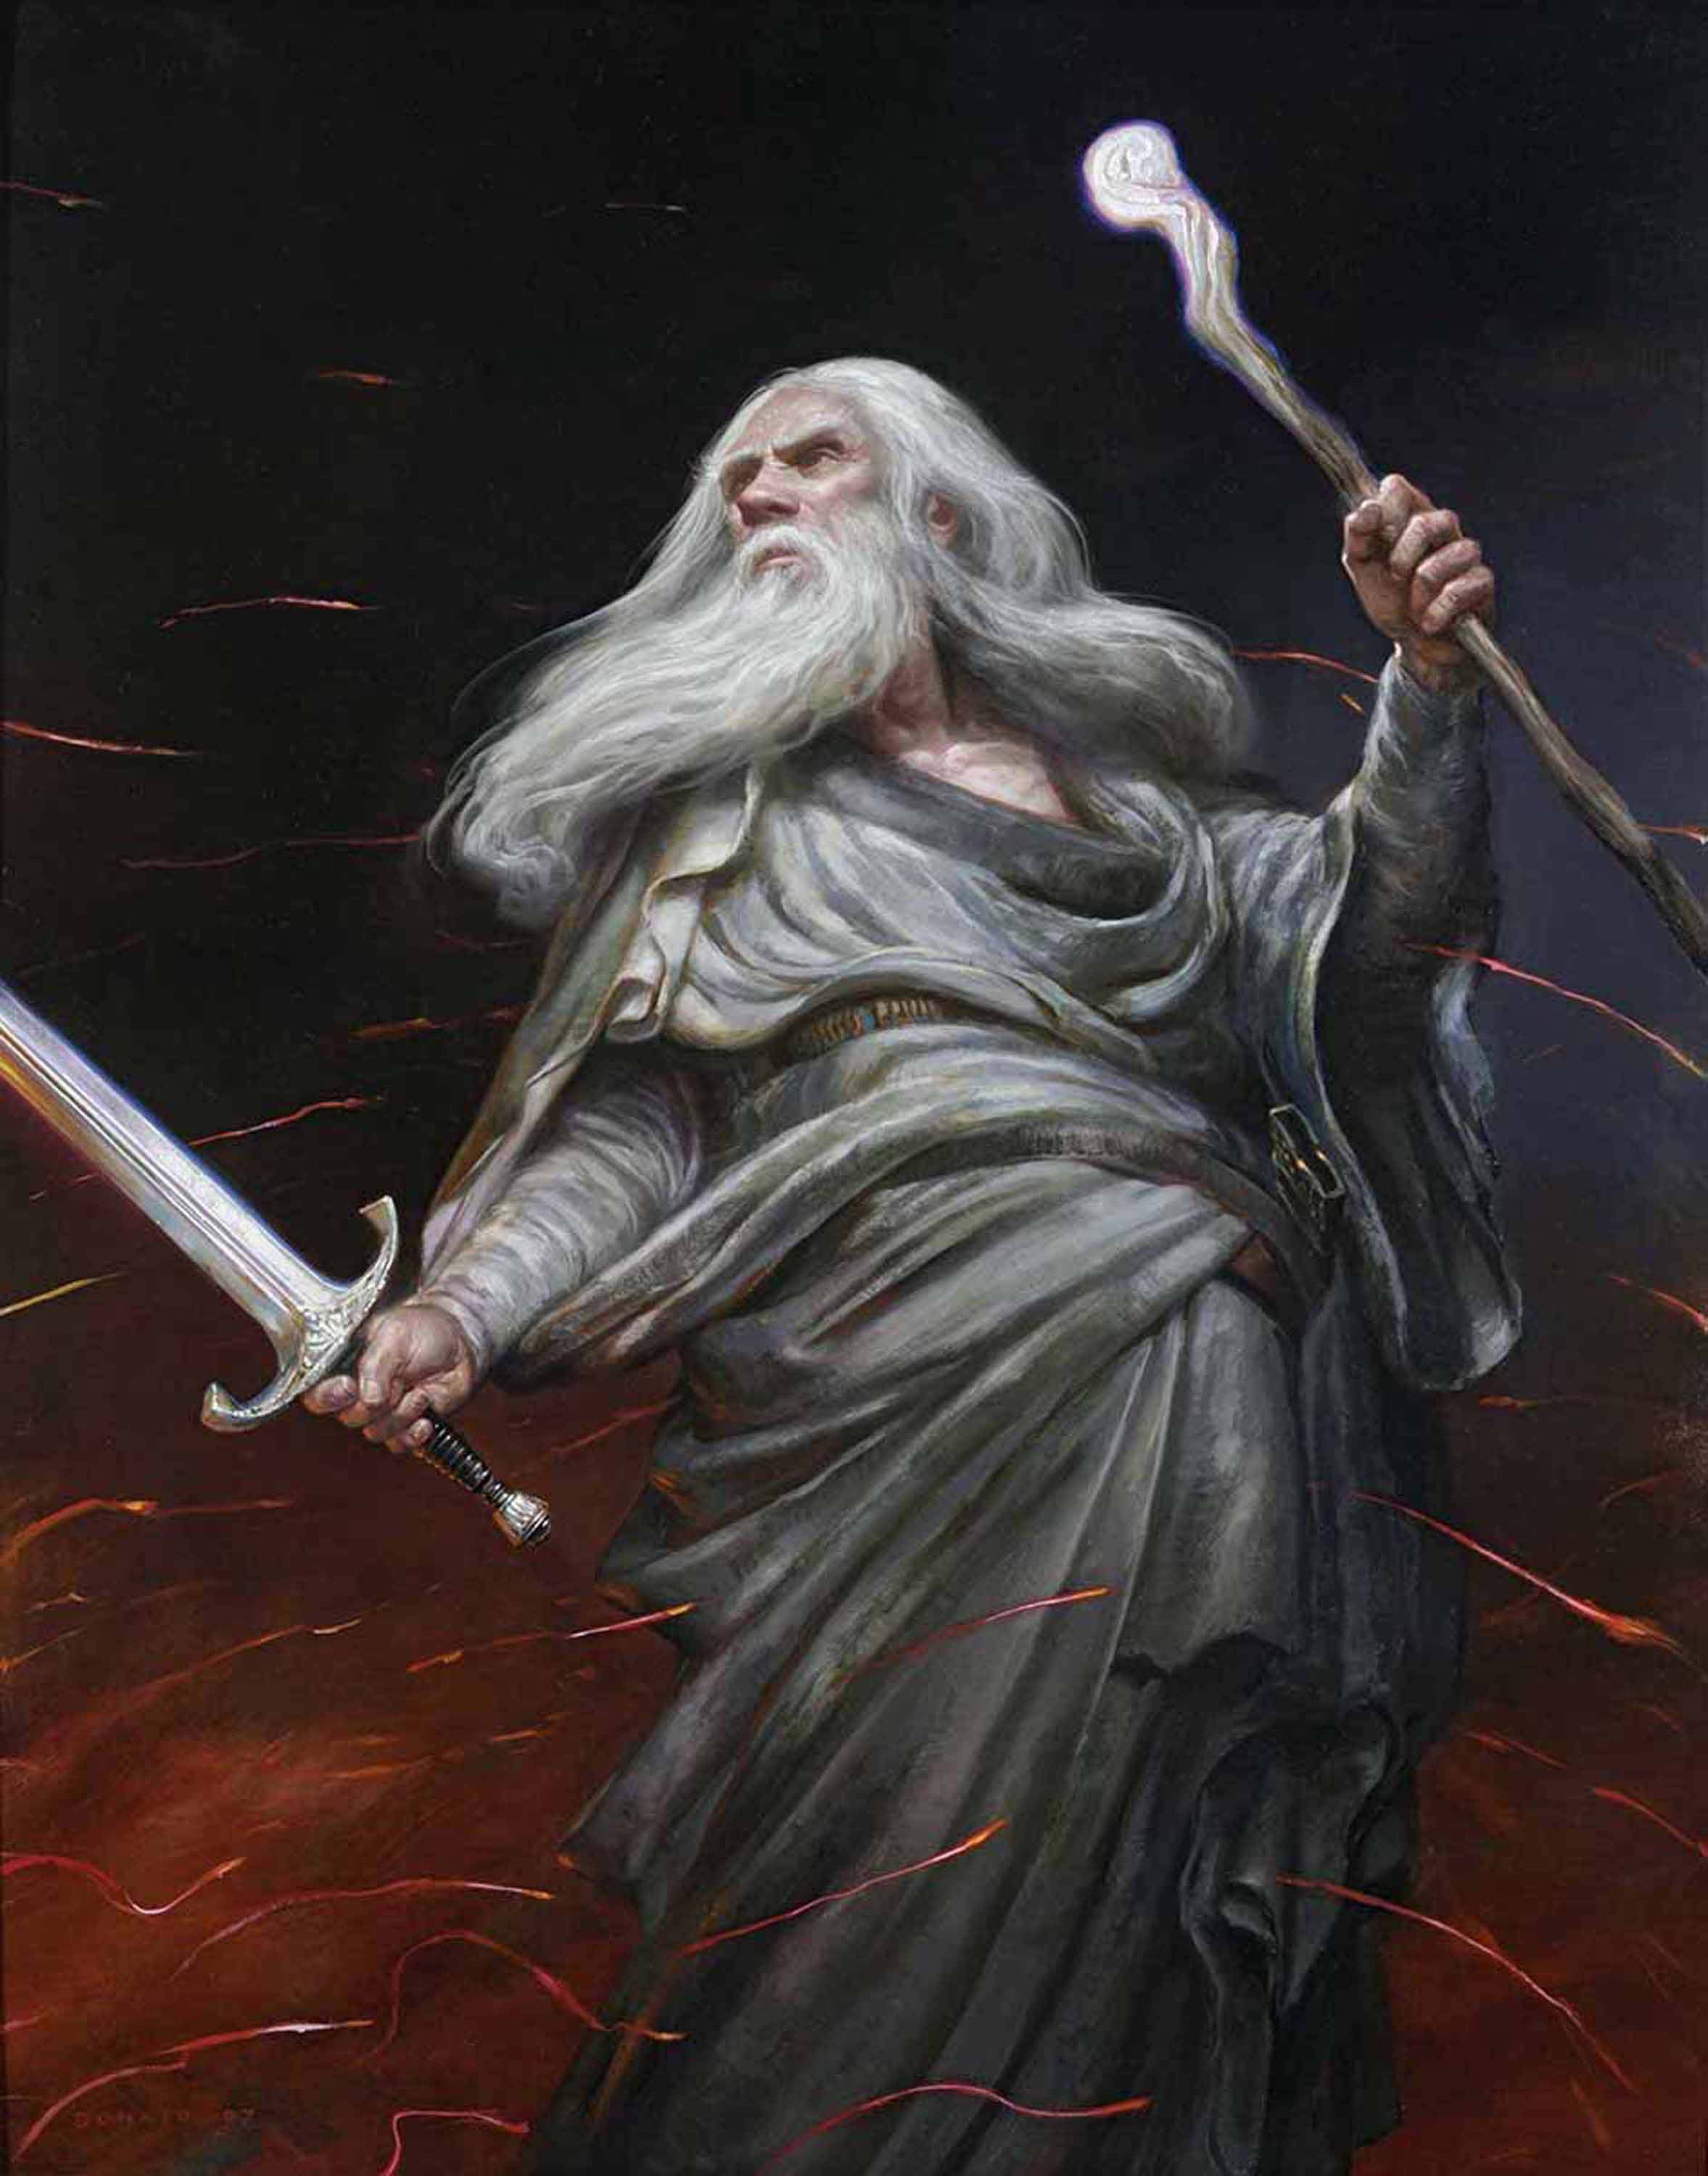 You Cannot Pass!
36" x 24" Oil on Panel  2007
appearing as the cover of Middle-earth: Journeys in Myth and Legend
Greisinger Collection